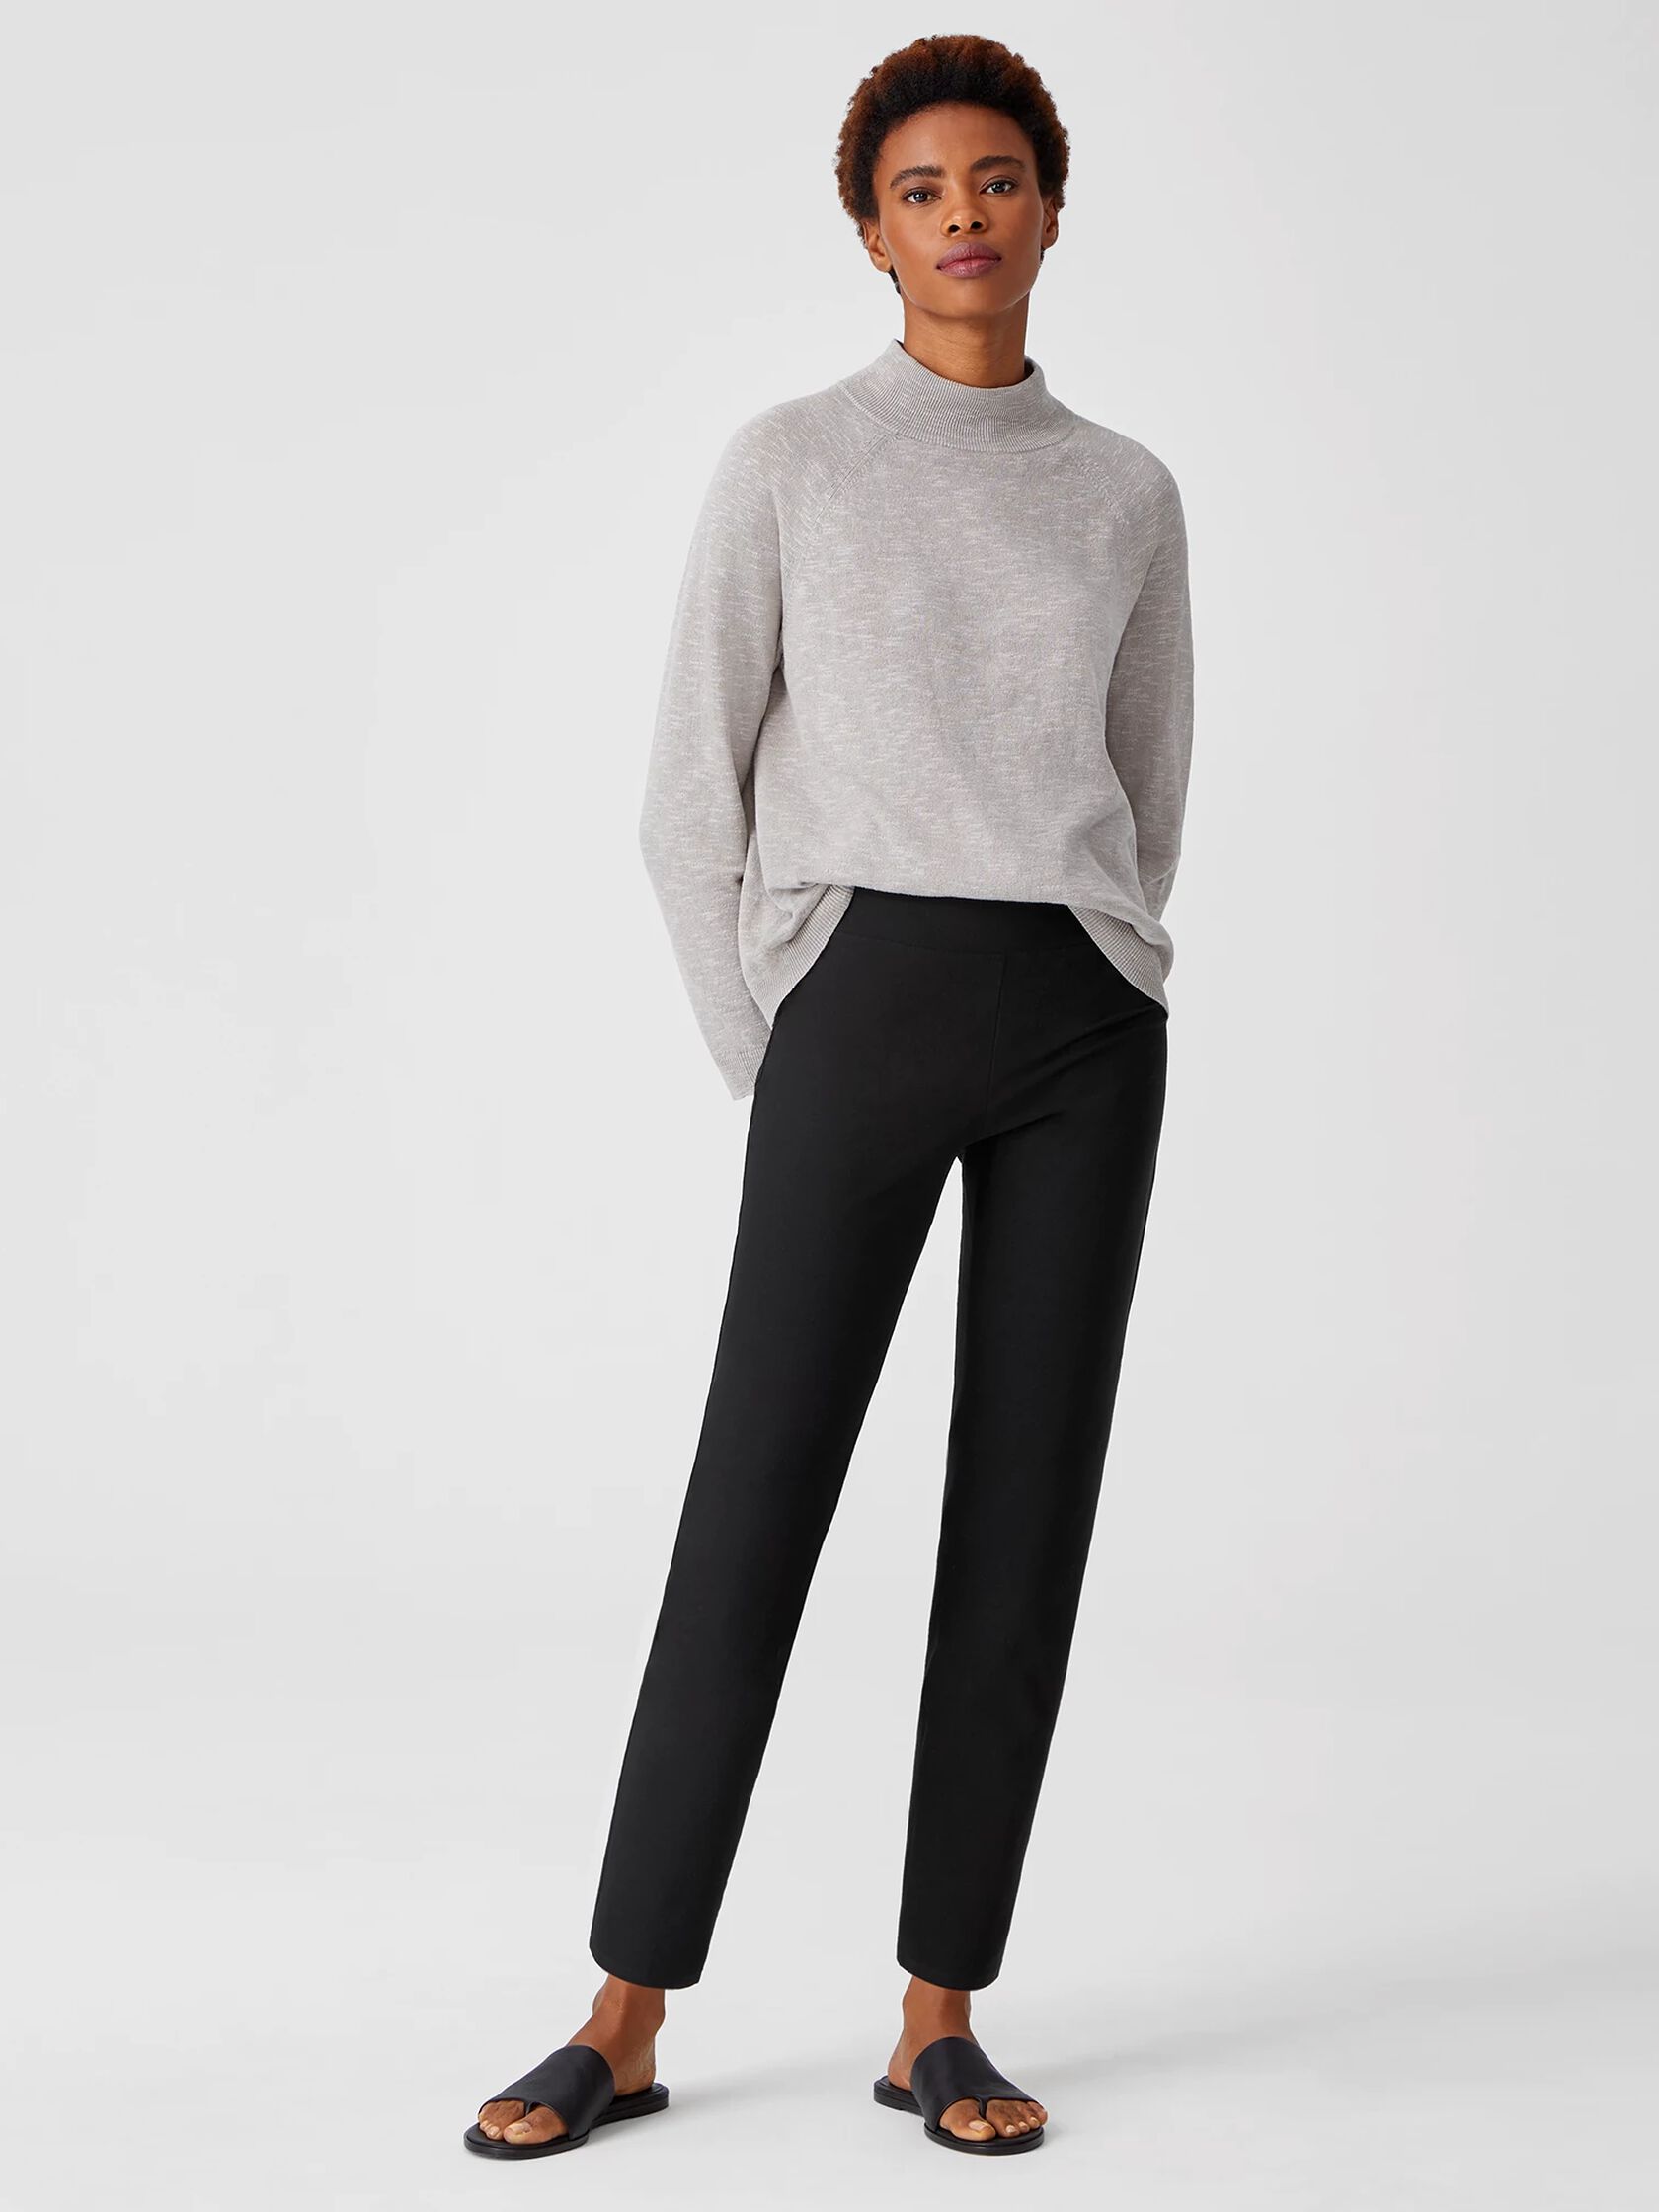 High-waisted trousers with logoed elastic waistband - Col. Grey/Black